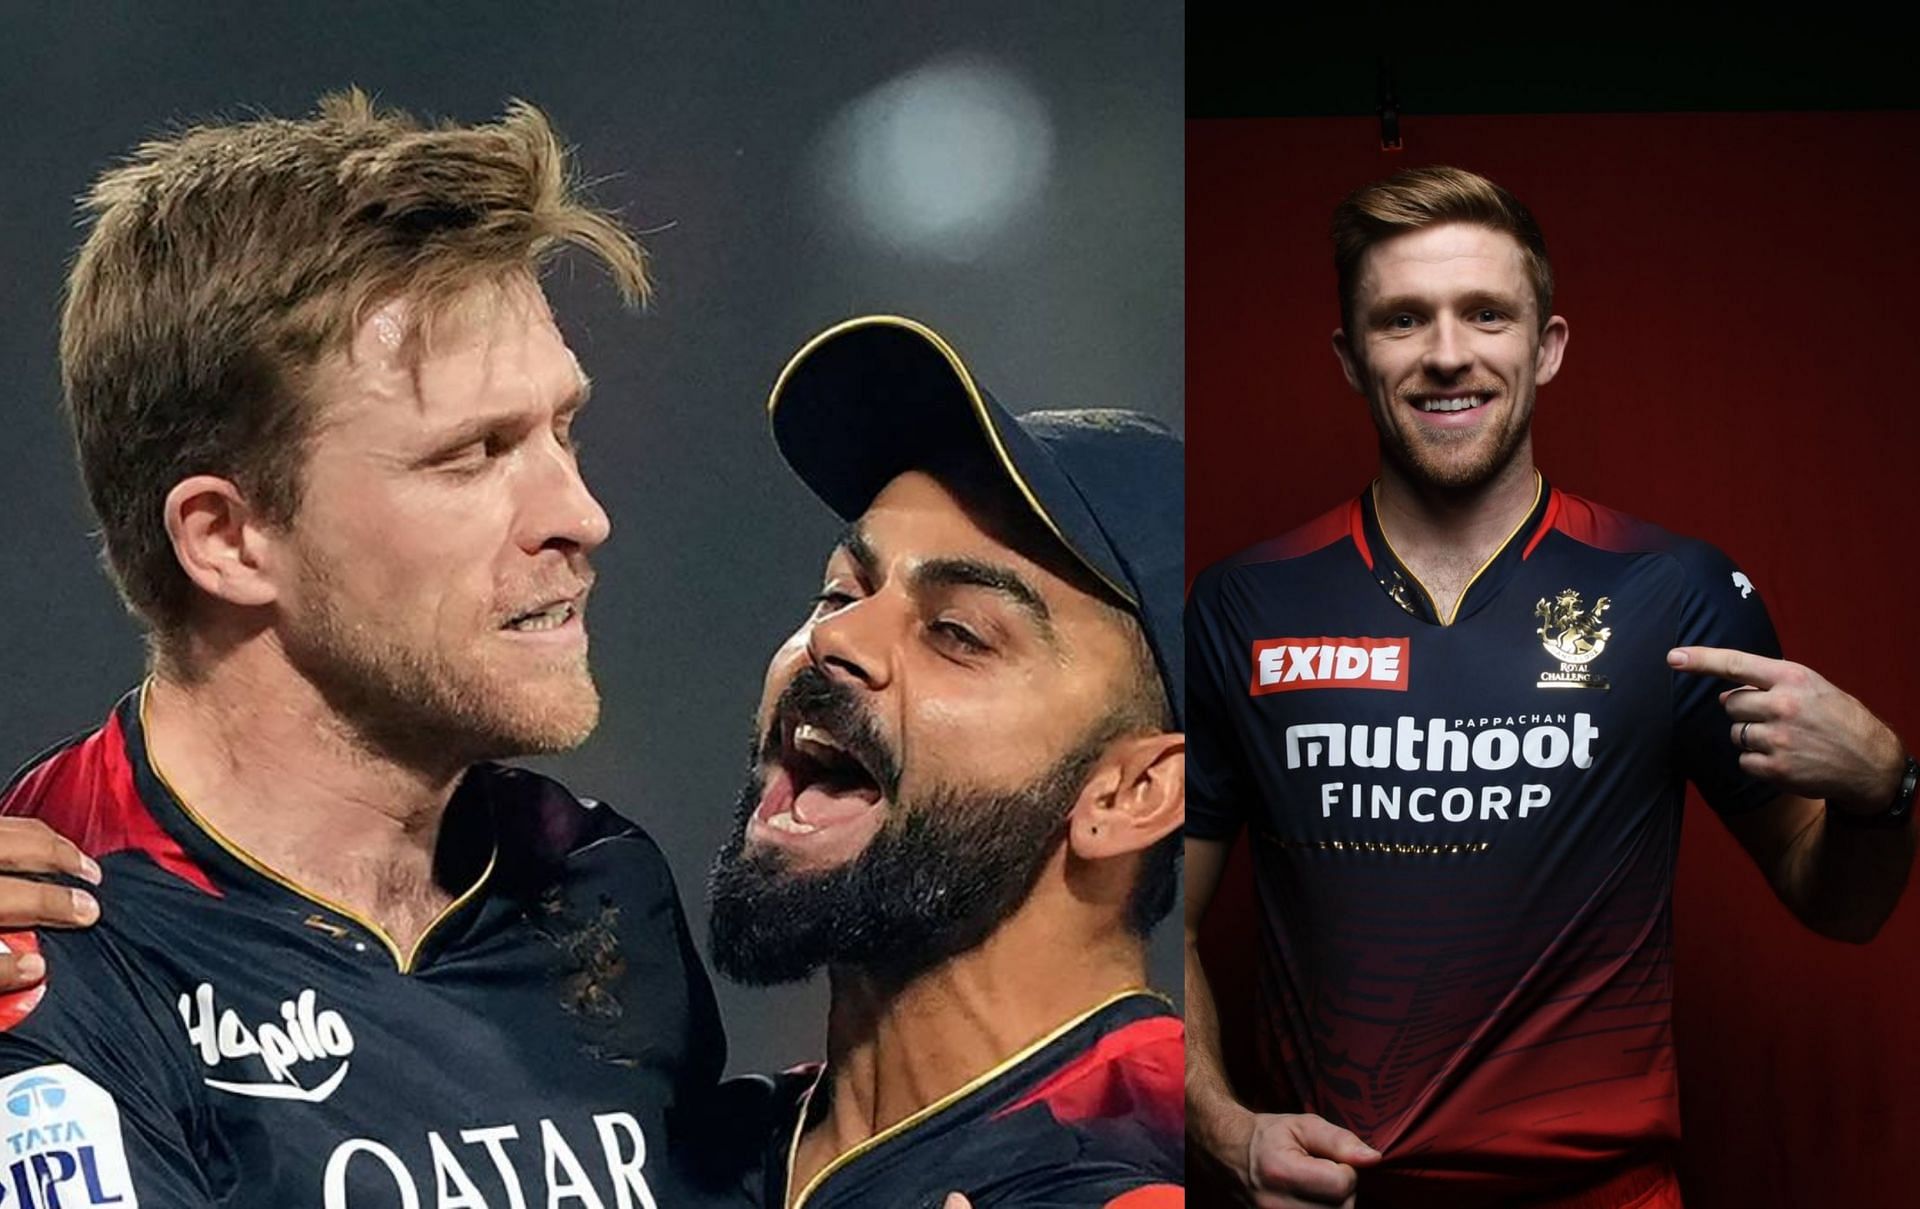 English all-rounder David Willey parted ways with RCB in IPL. (PC: Instagram)